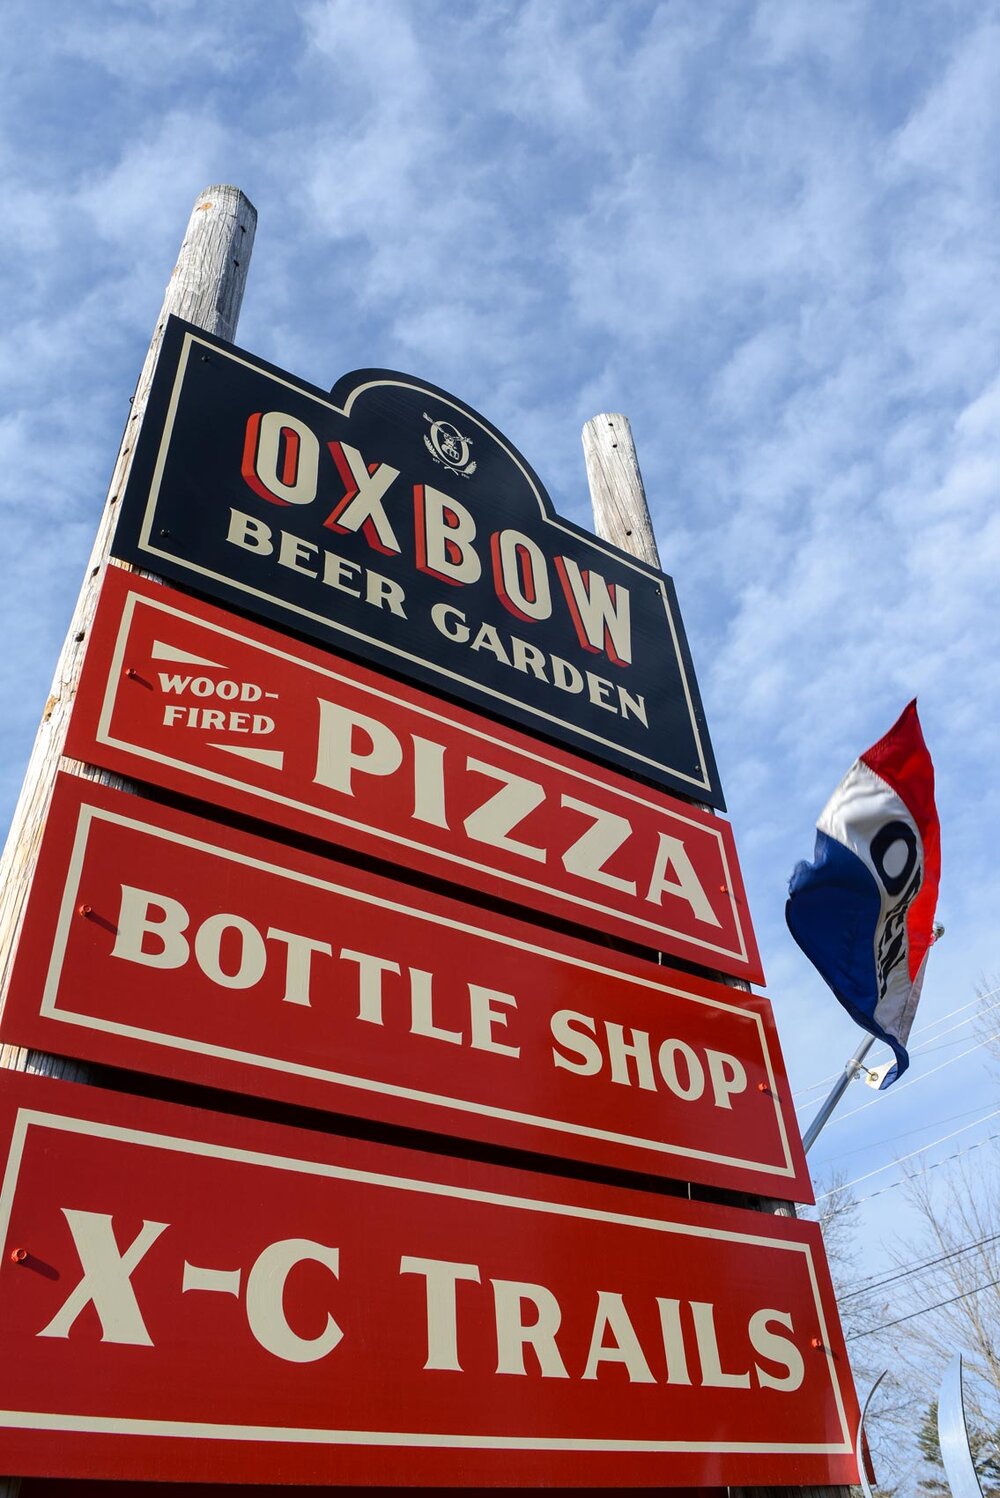 As seen from the road, Oxbow signage details all that the new location has to oer. Guests are encouraged to bring skis to enjoy the property’s cross-country trails, while outdoor picnic tables provide a true beer garden feel.